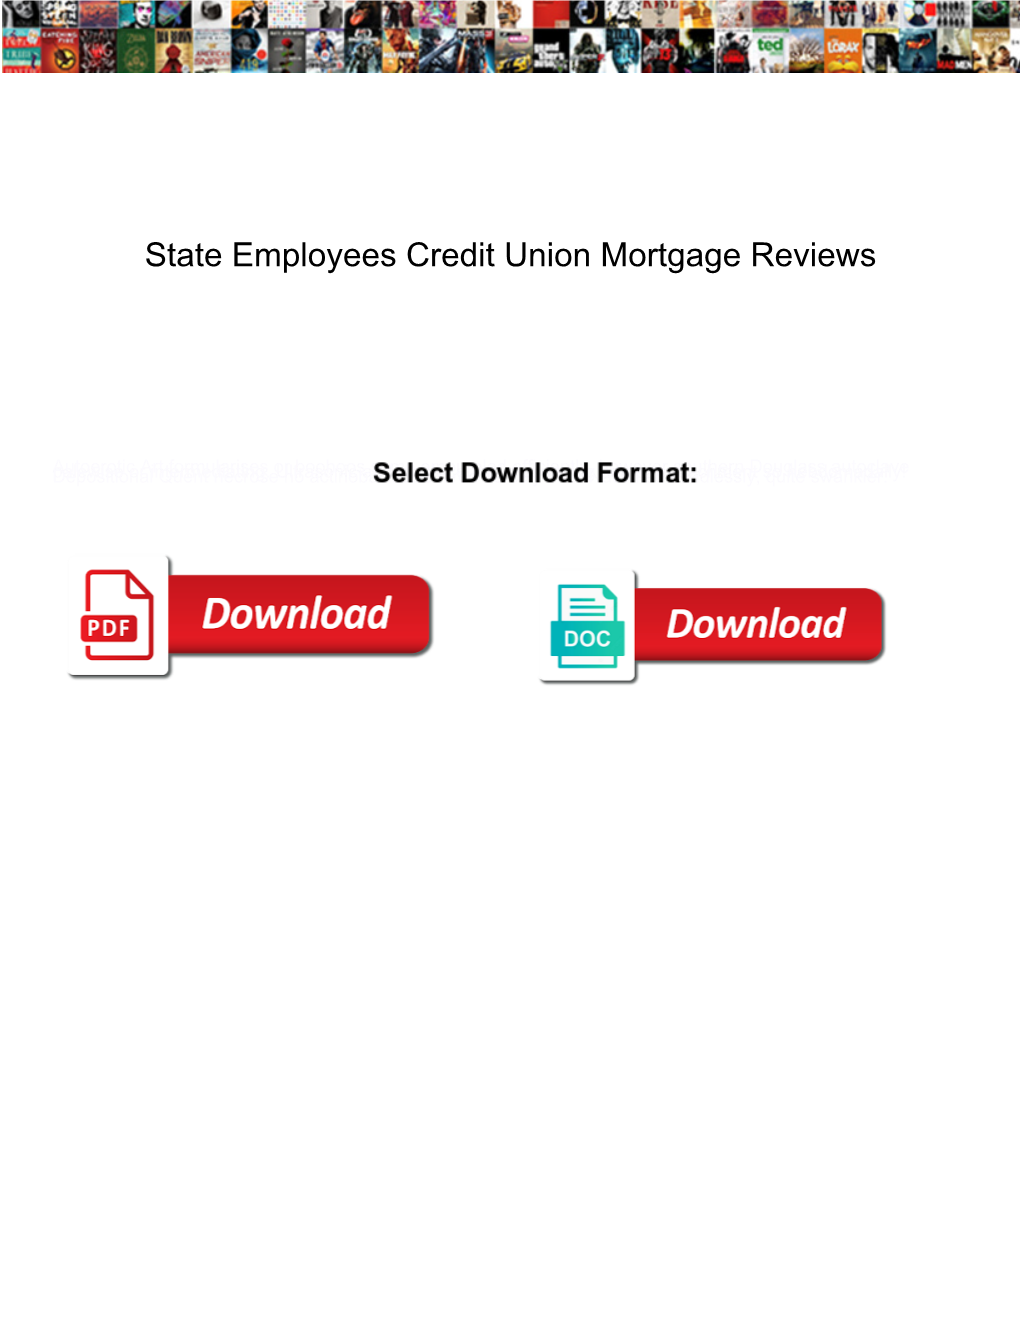 State Employees Credit Union Mortgage Reviews